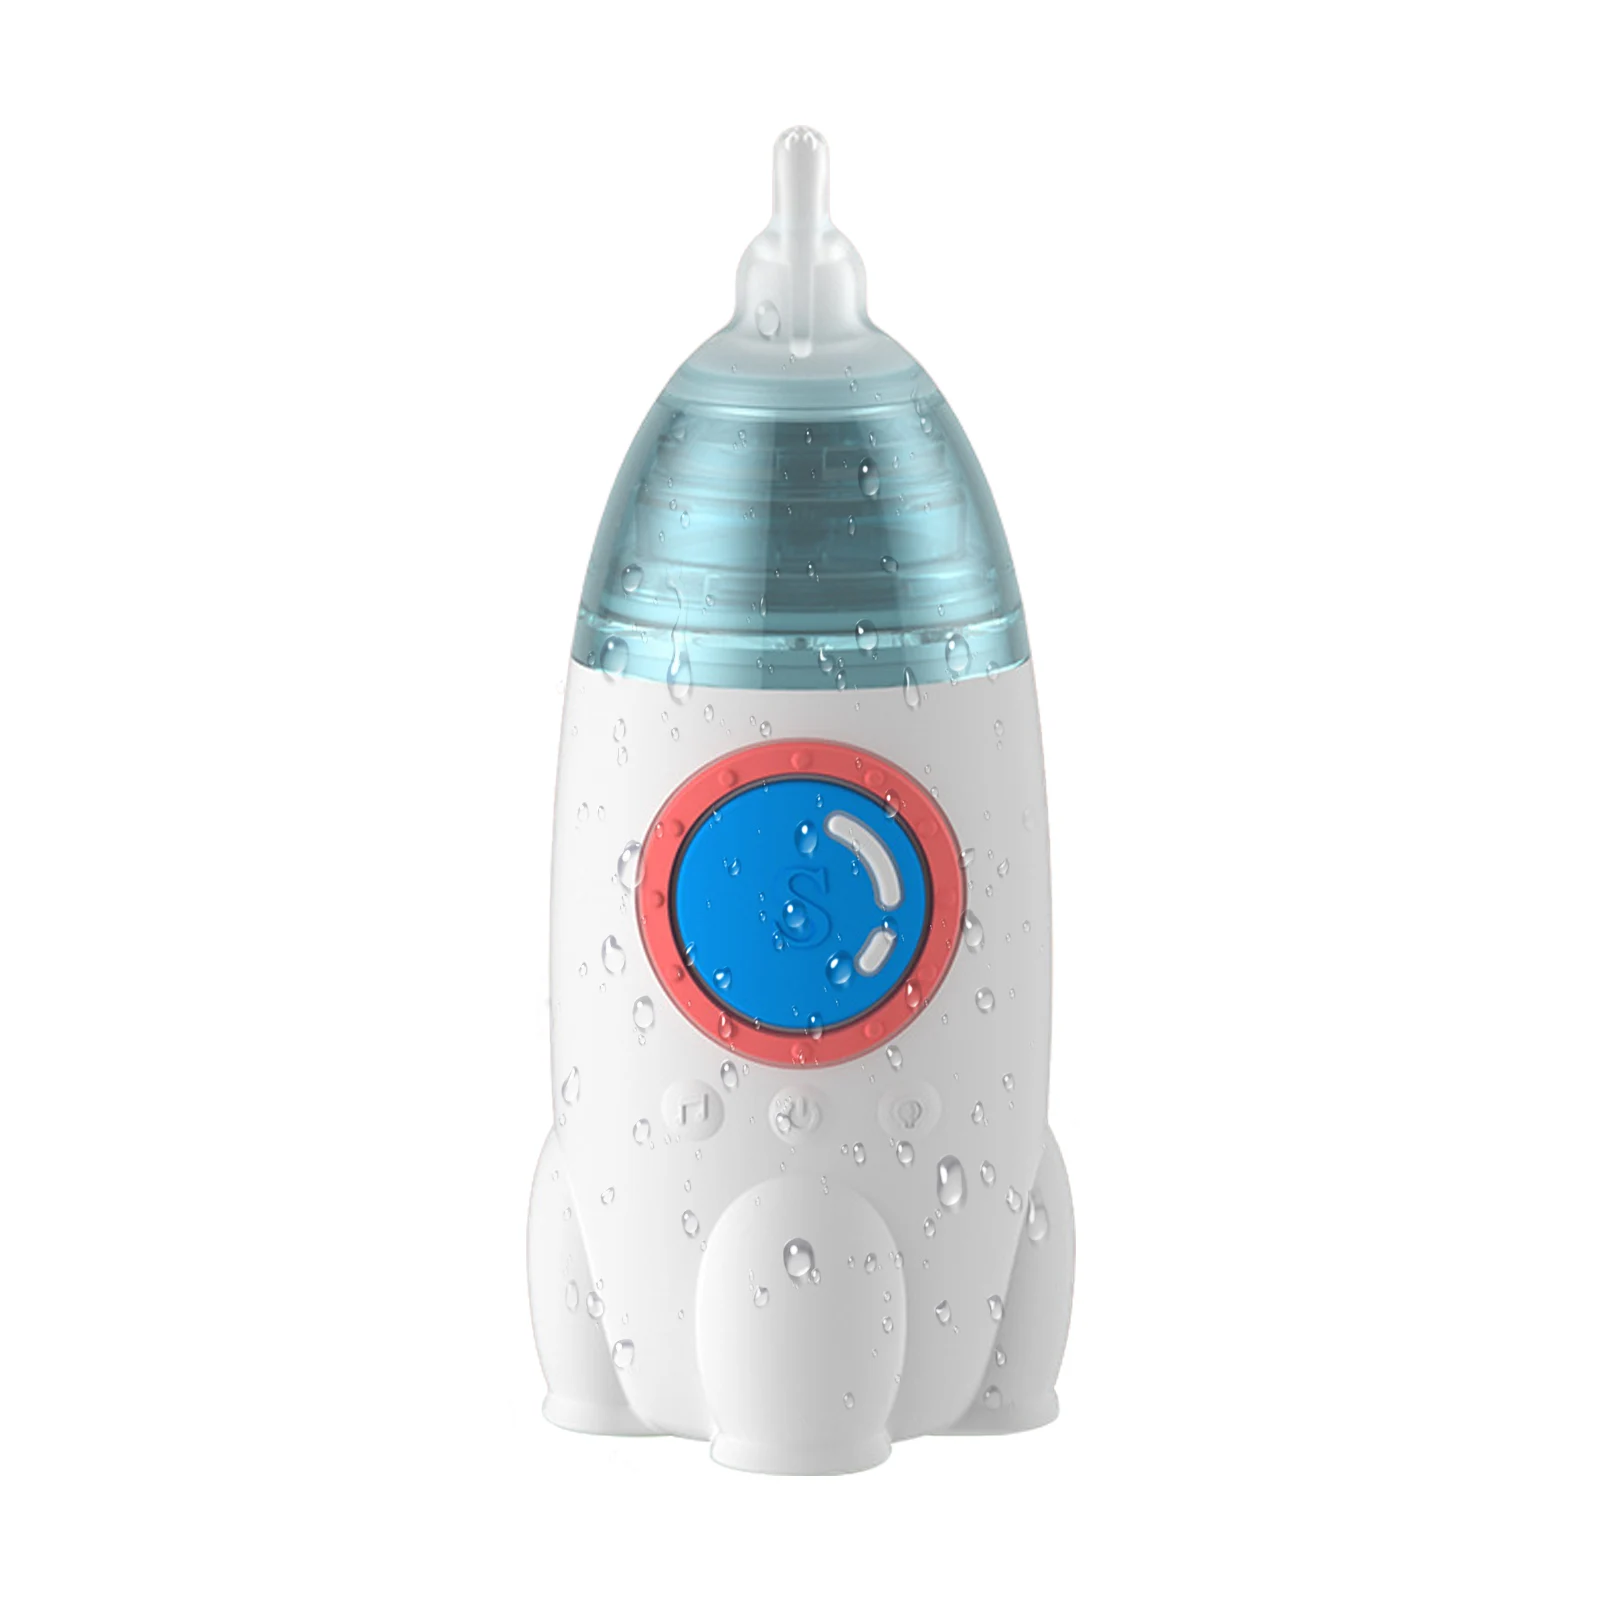 

Nose Sucker For Baby Electric Snot Sucker For Babies Rechargeable Snot Sucker Infants Nose Cleaner Snot Mucus Remover To Relieve